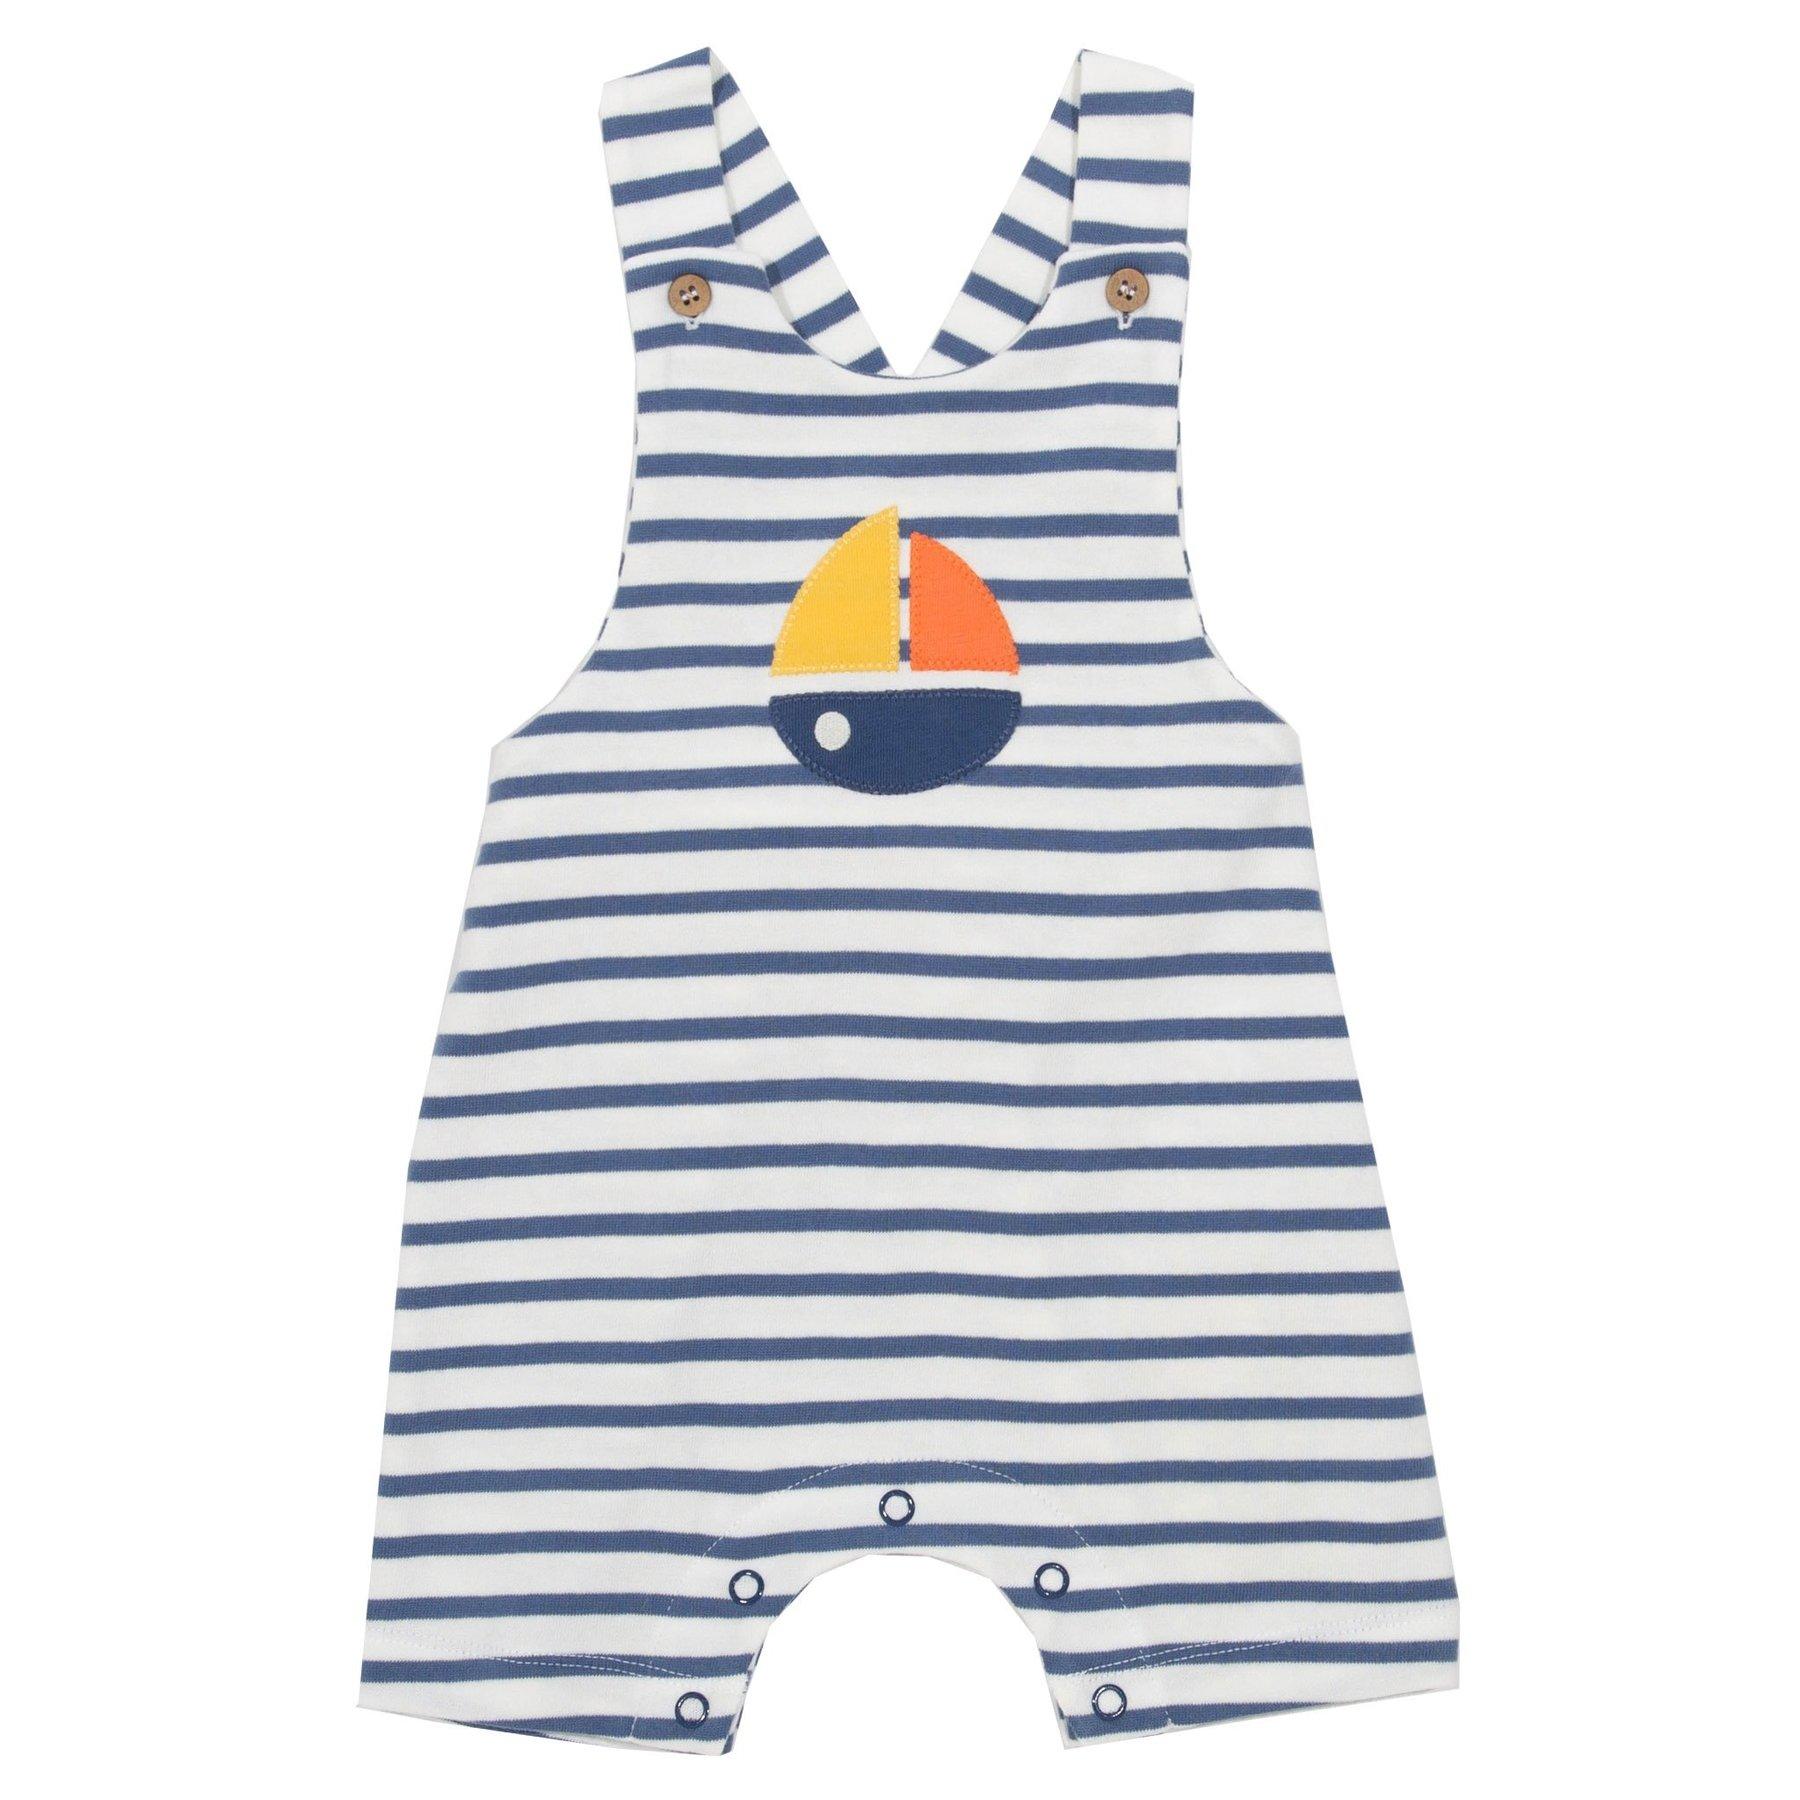 Kite Clothing bay dungarees front